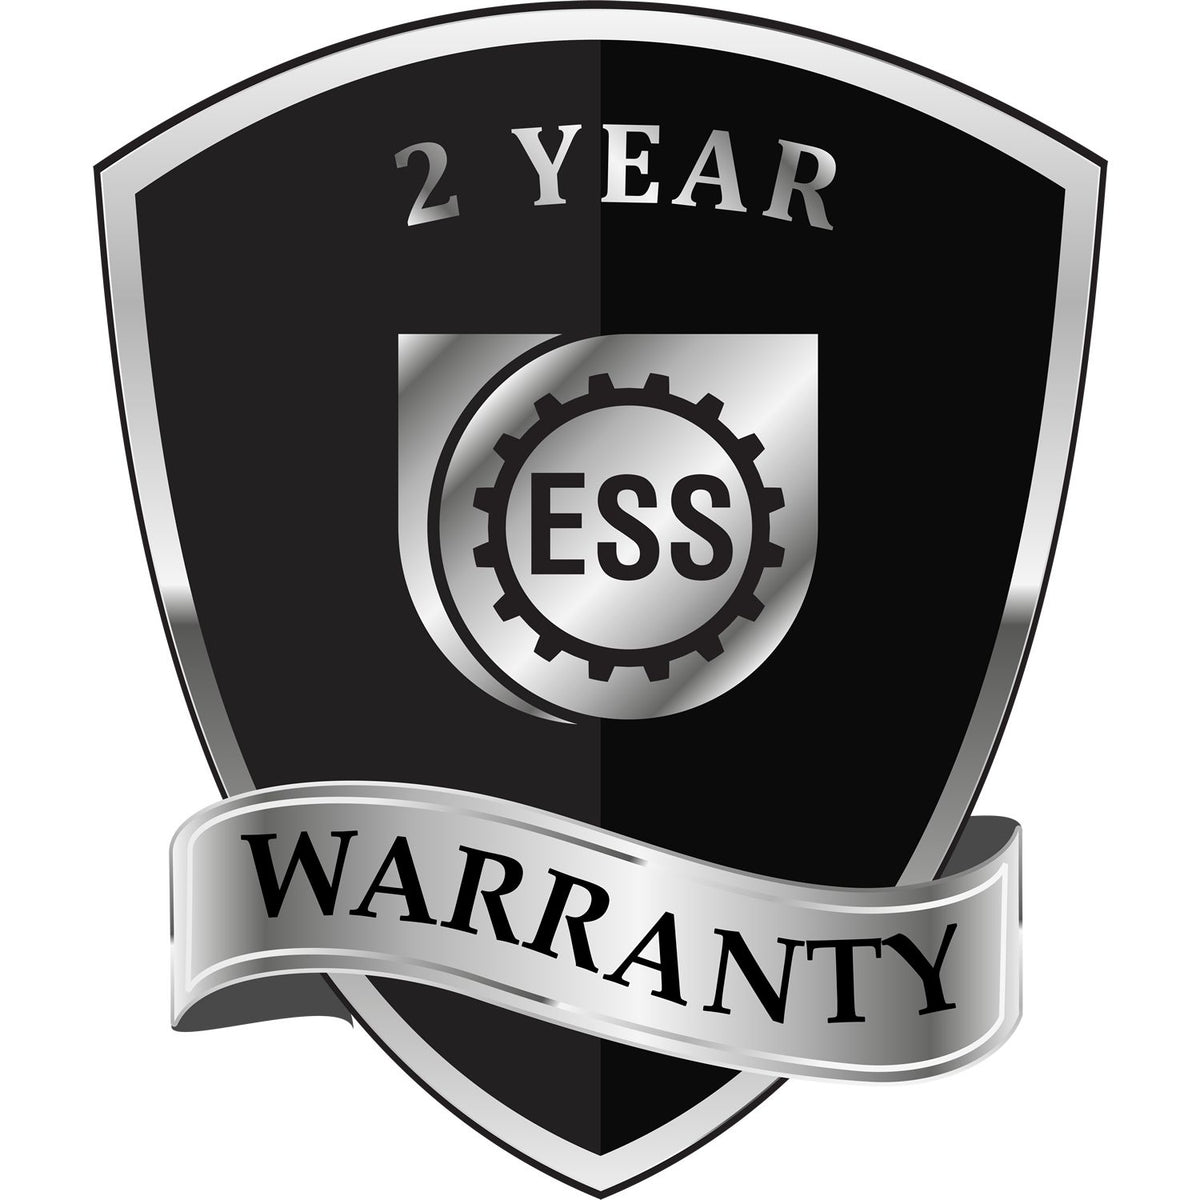 A black and silver badge or emblem showing warranty information for the Gift Arizona Geologist Seal